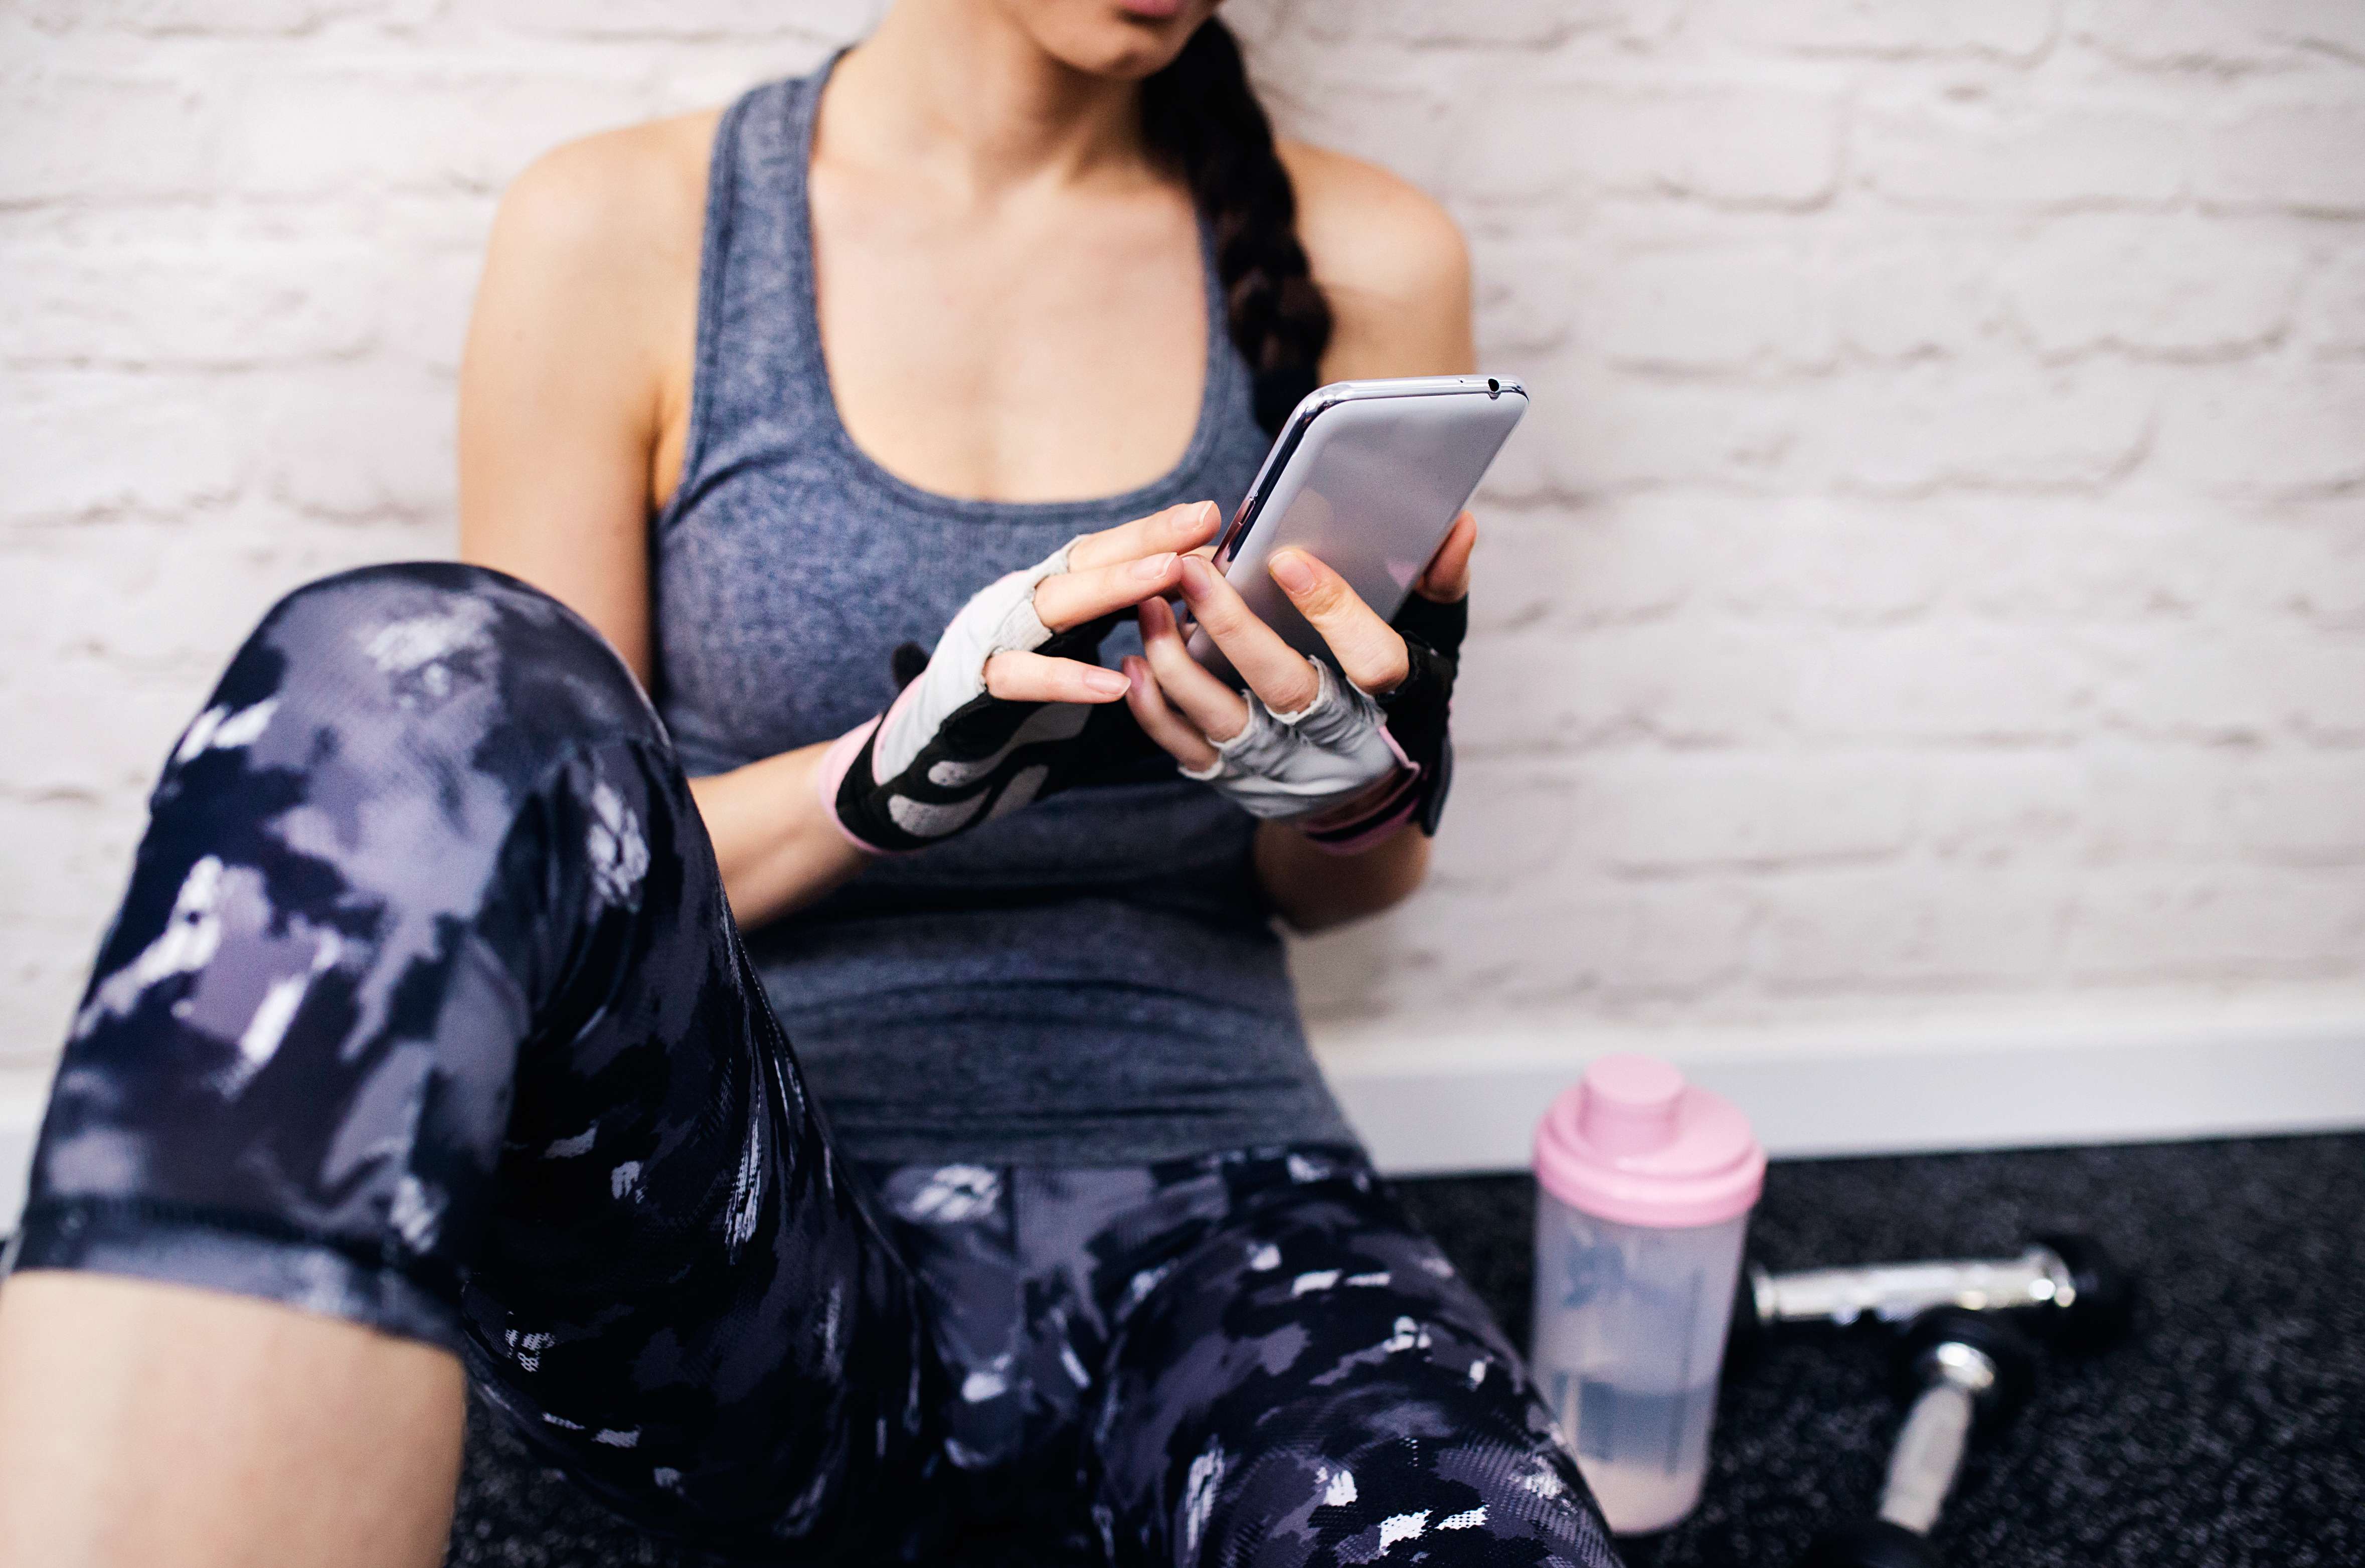 Hong Kong fitness experts agree with US researchers that the distraction of calls or texting not only can lead to injury but also undermine the intensity and efficacy of a workout